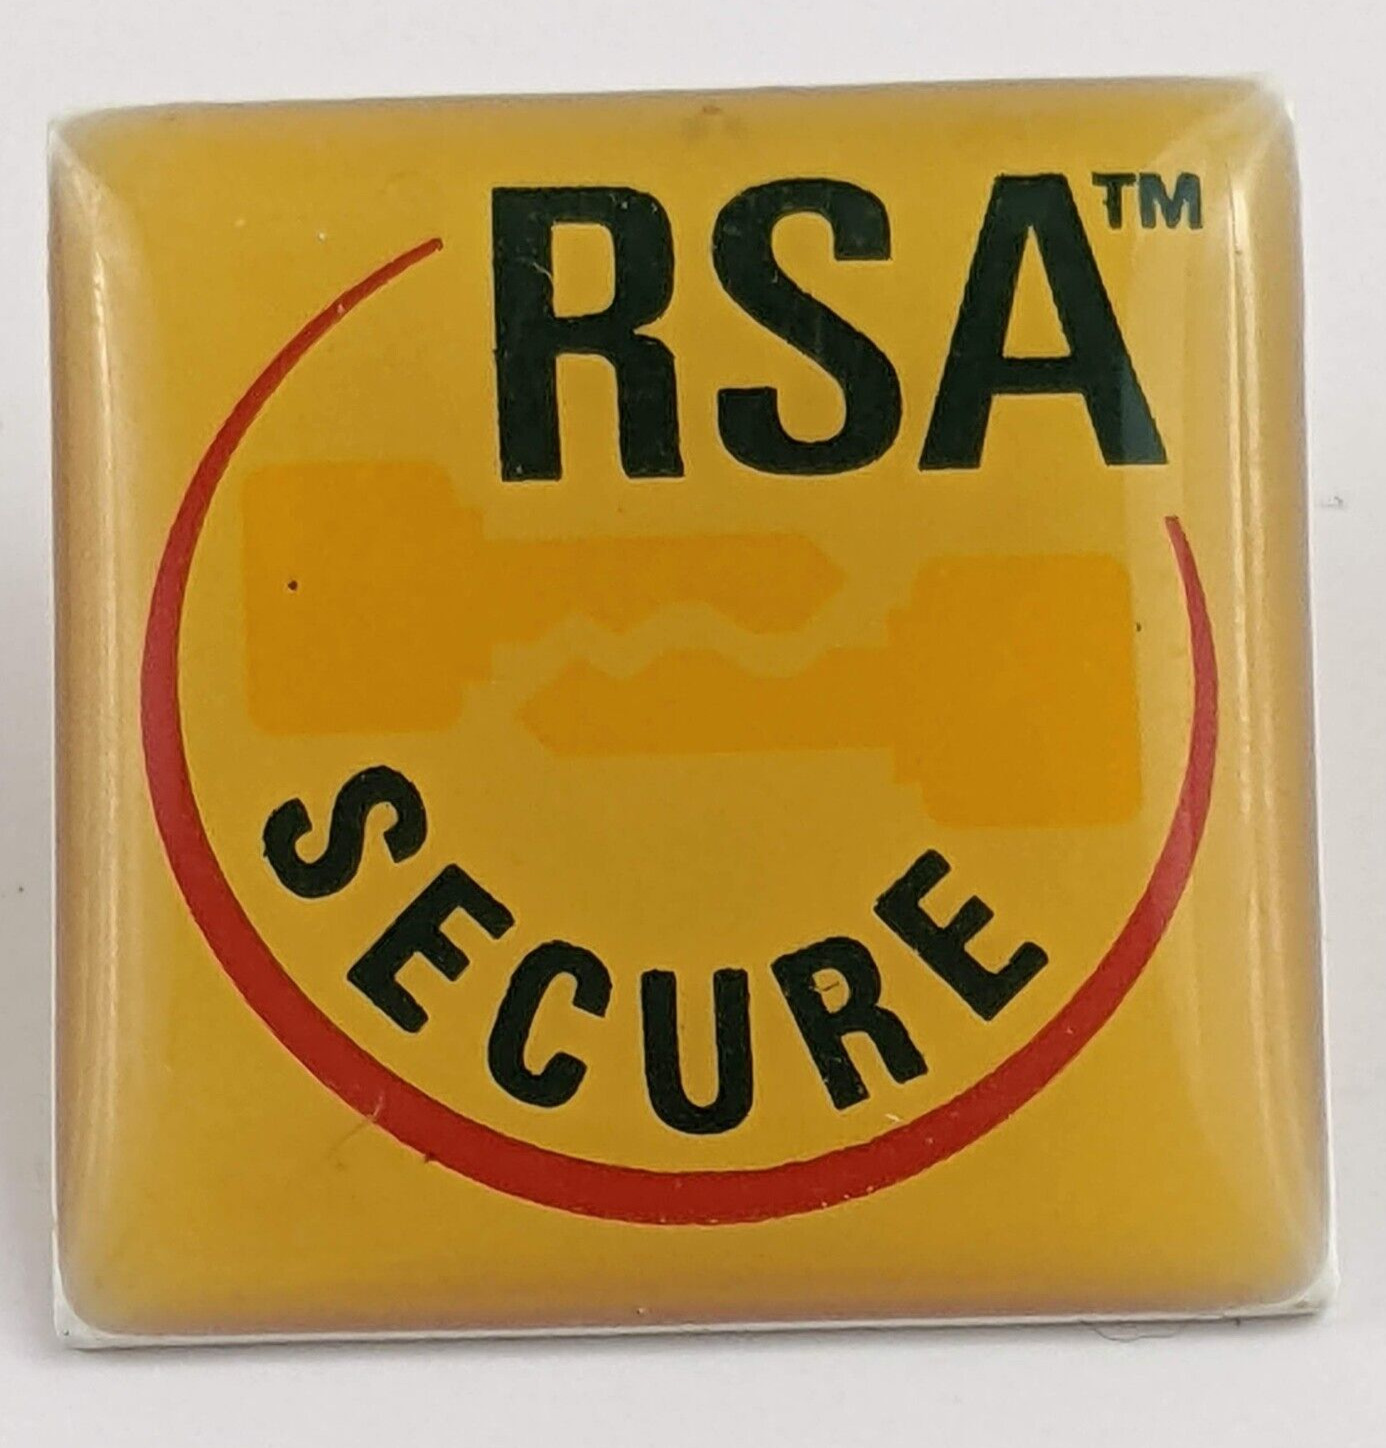 Vintage RSA Secure Pin | Computing, Tech & Cryptography History